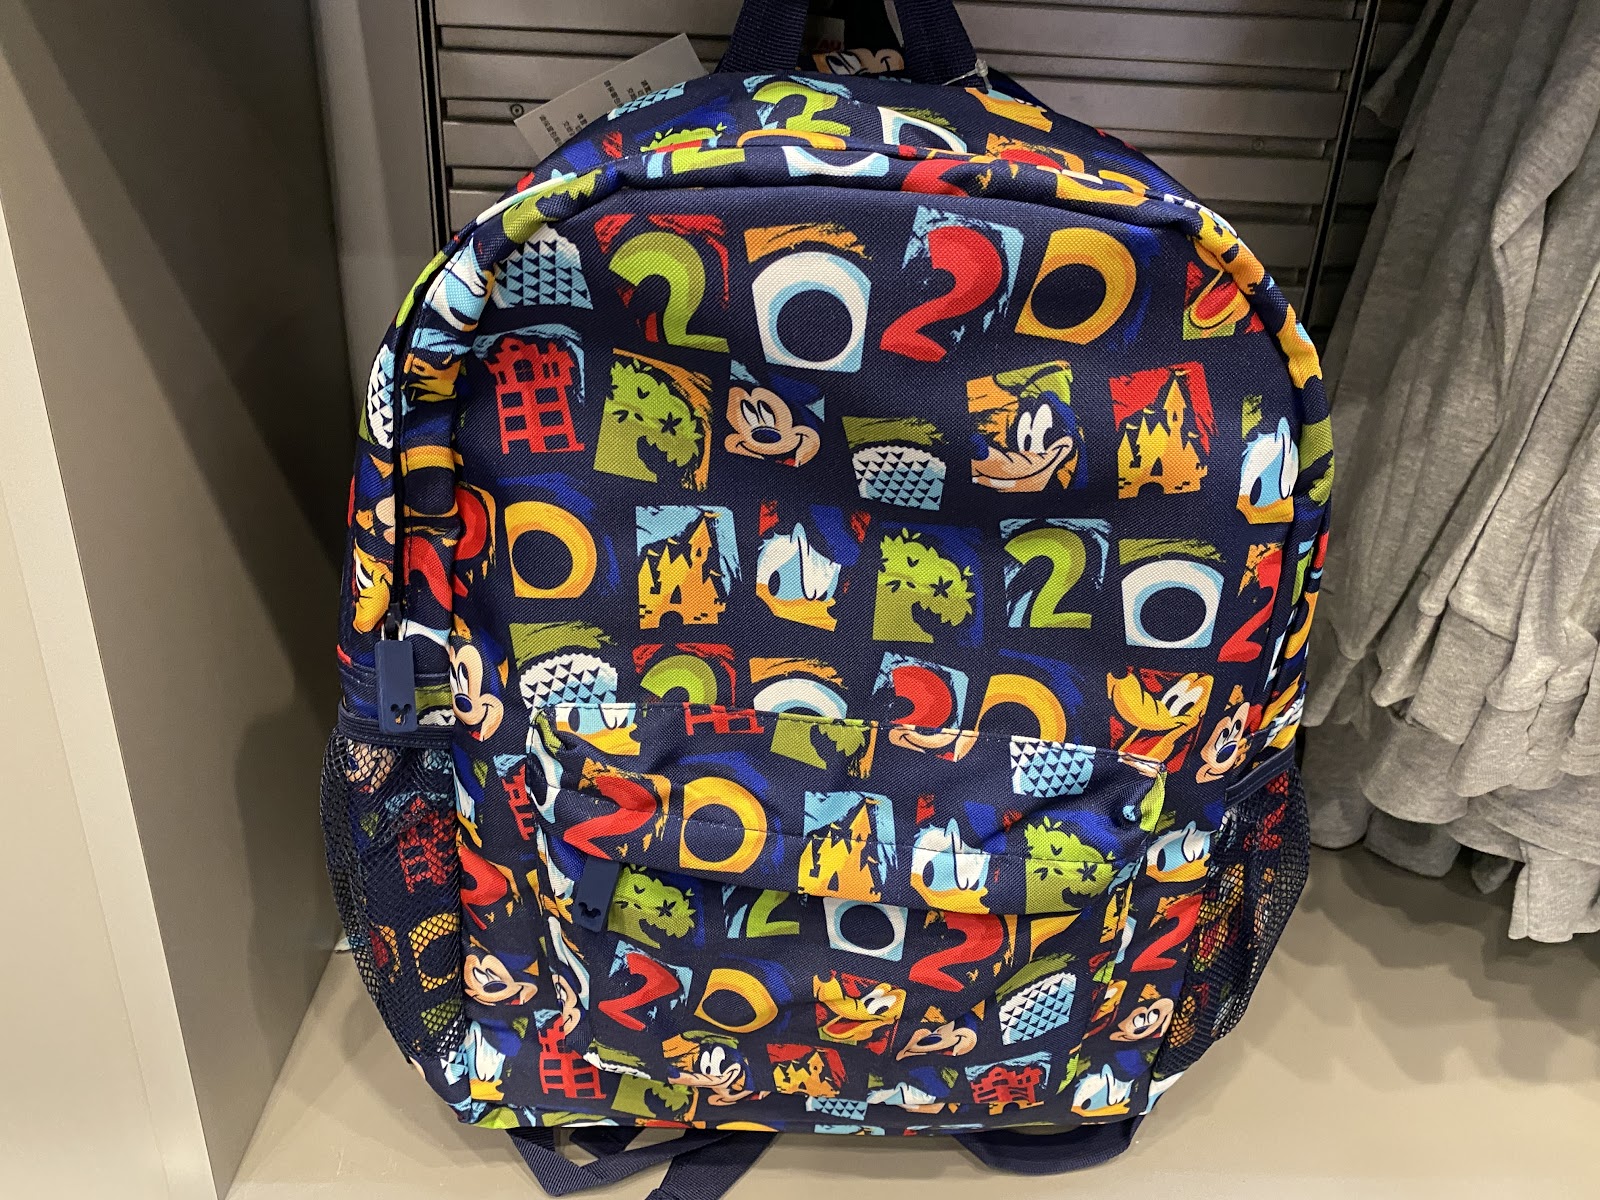 New Dated 2020 Merchandise Appears at Walt Disney World